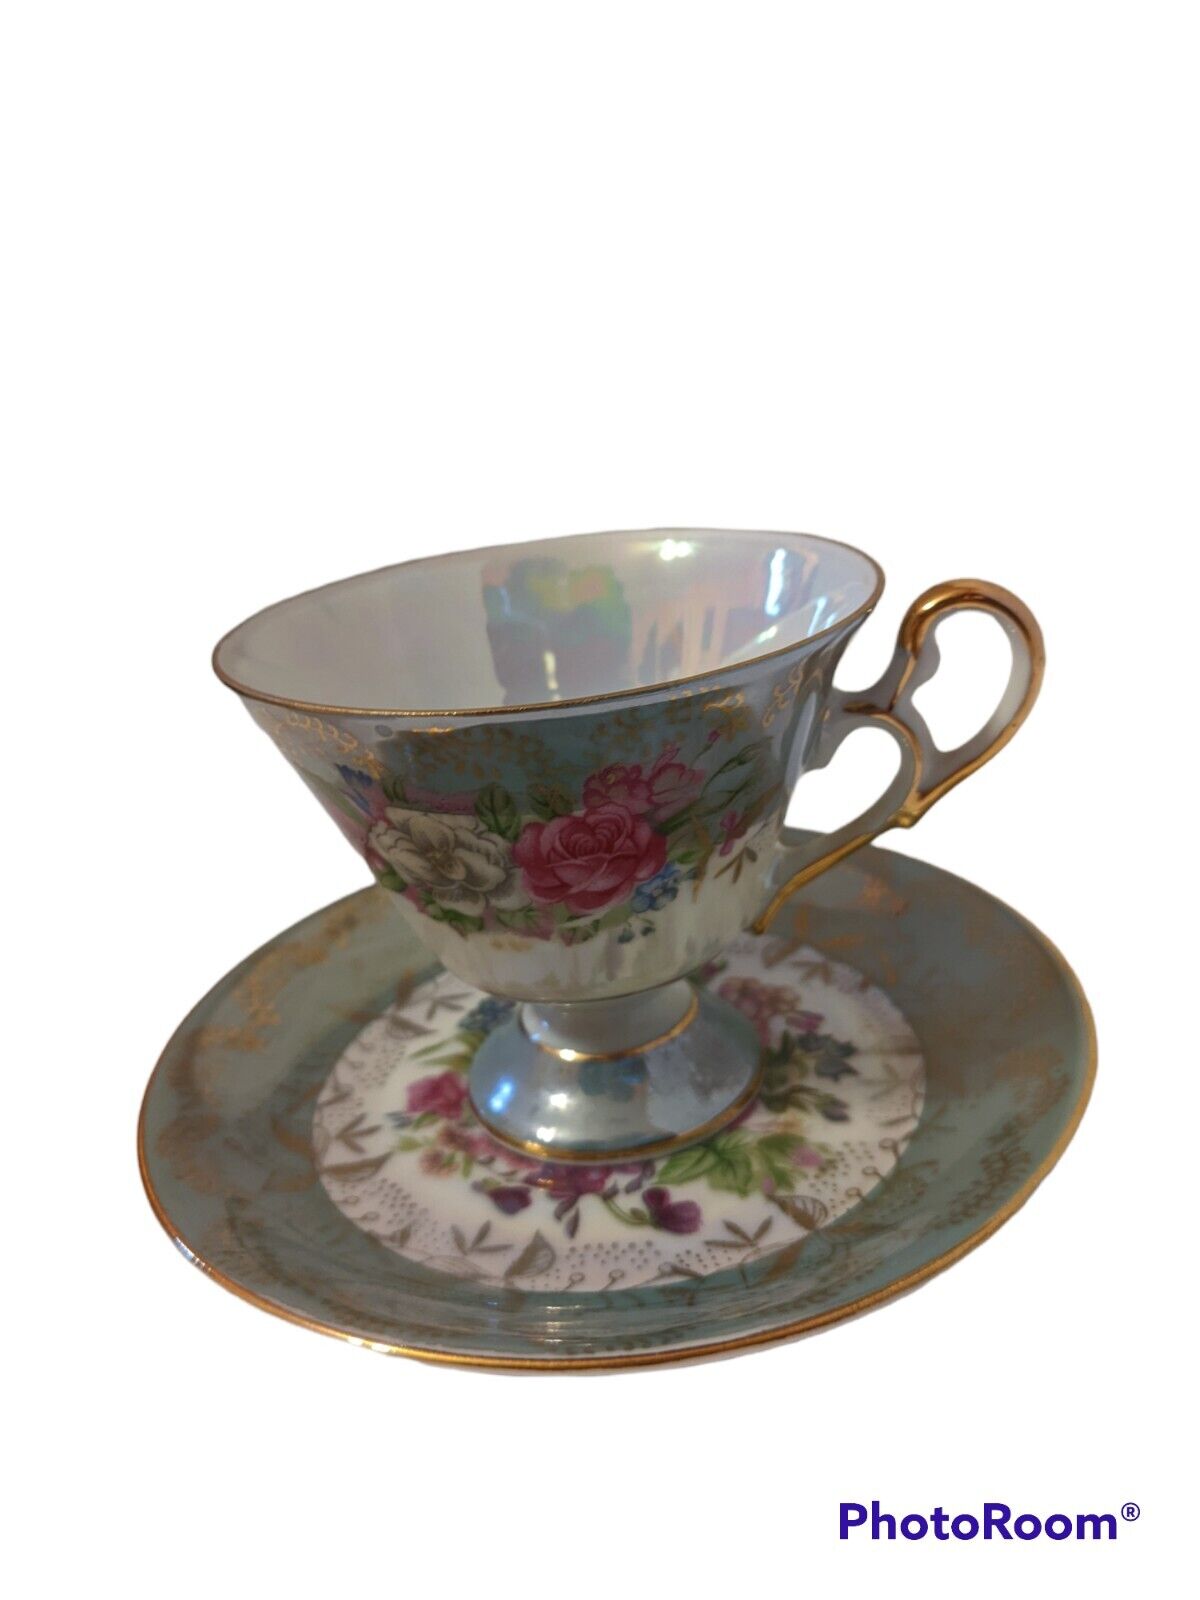 Norcrest China Tea Cup Saucer   Green  Pink Opalescent Footed Floral Roses 4 oz